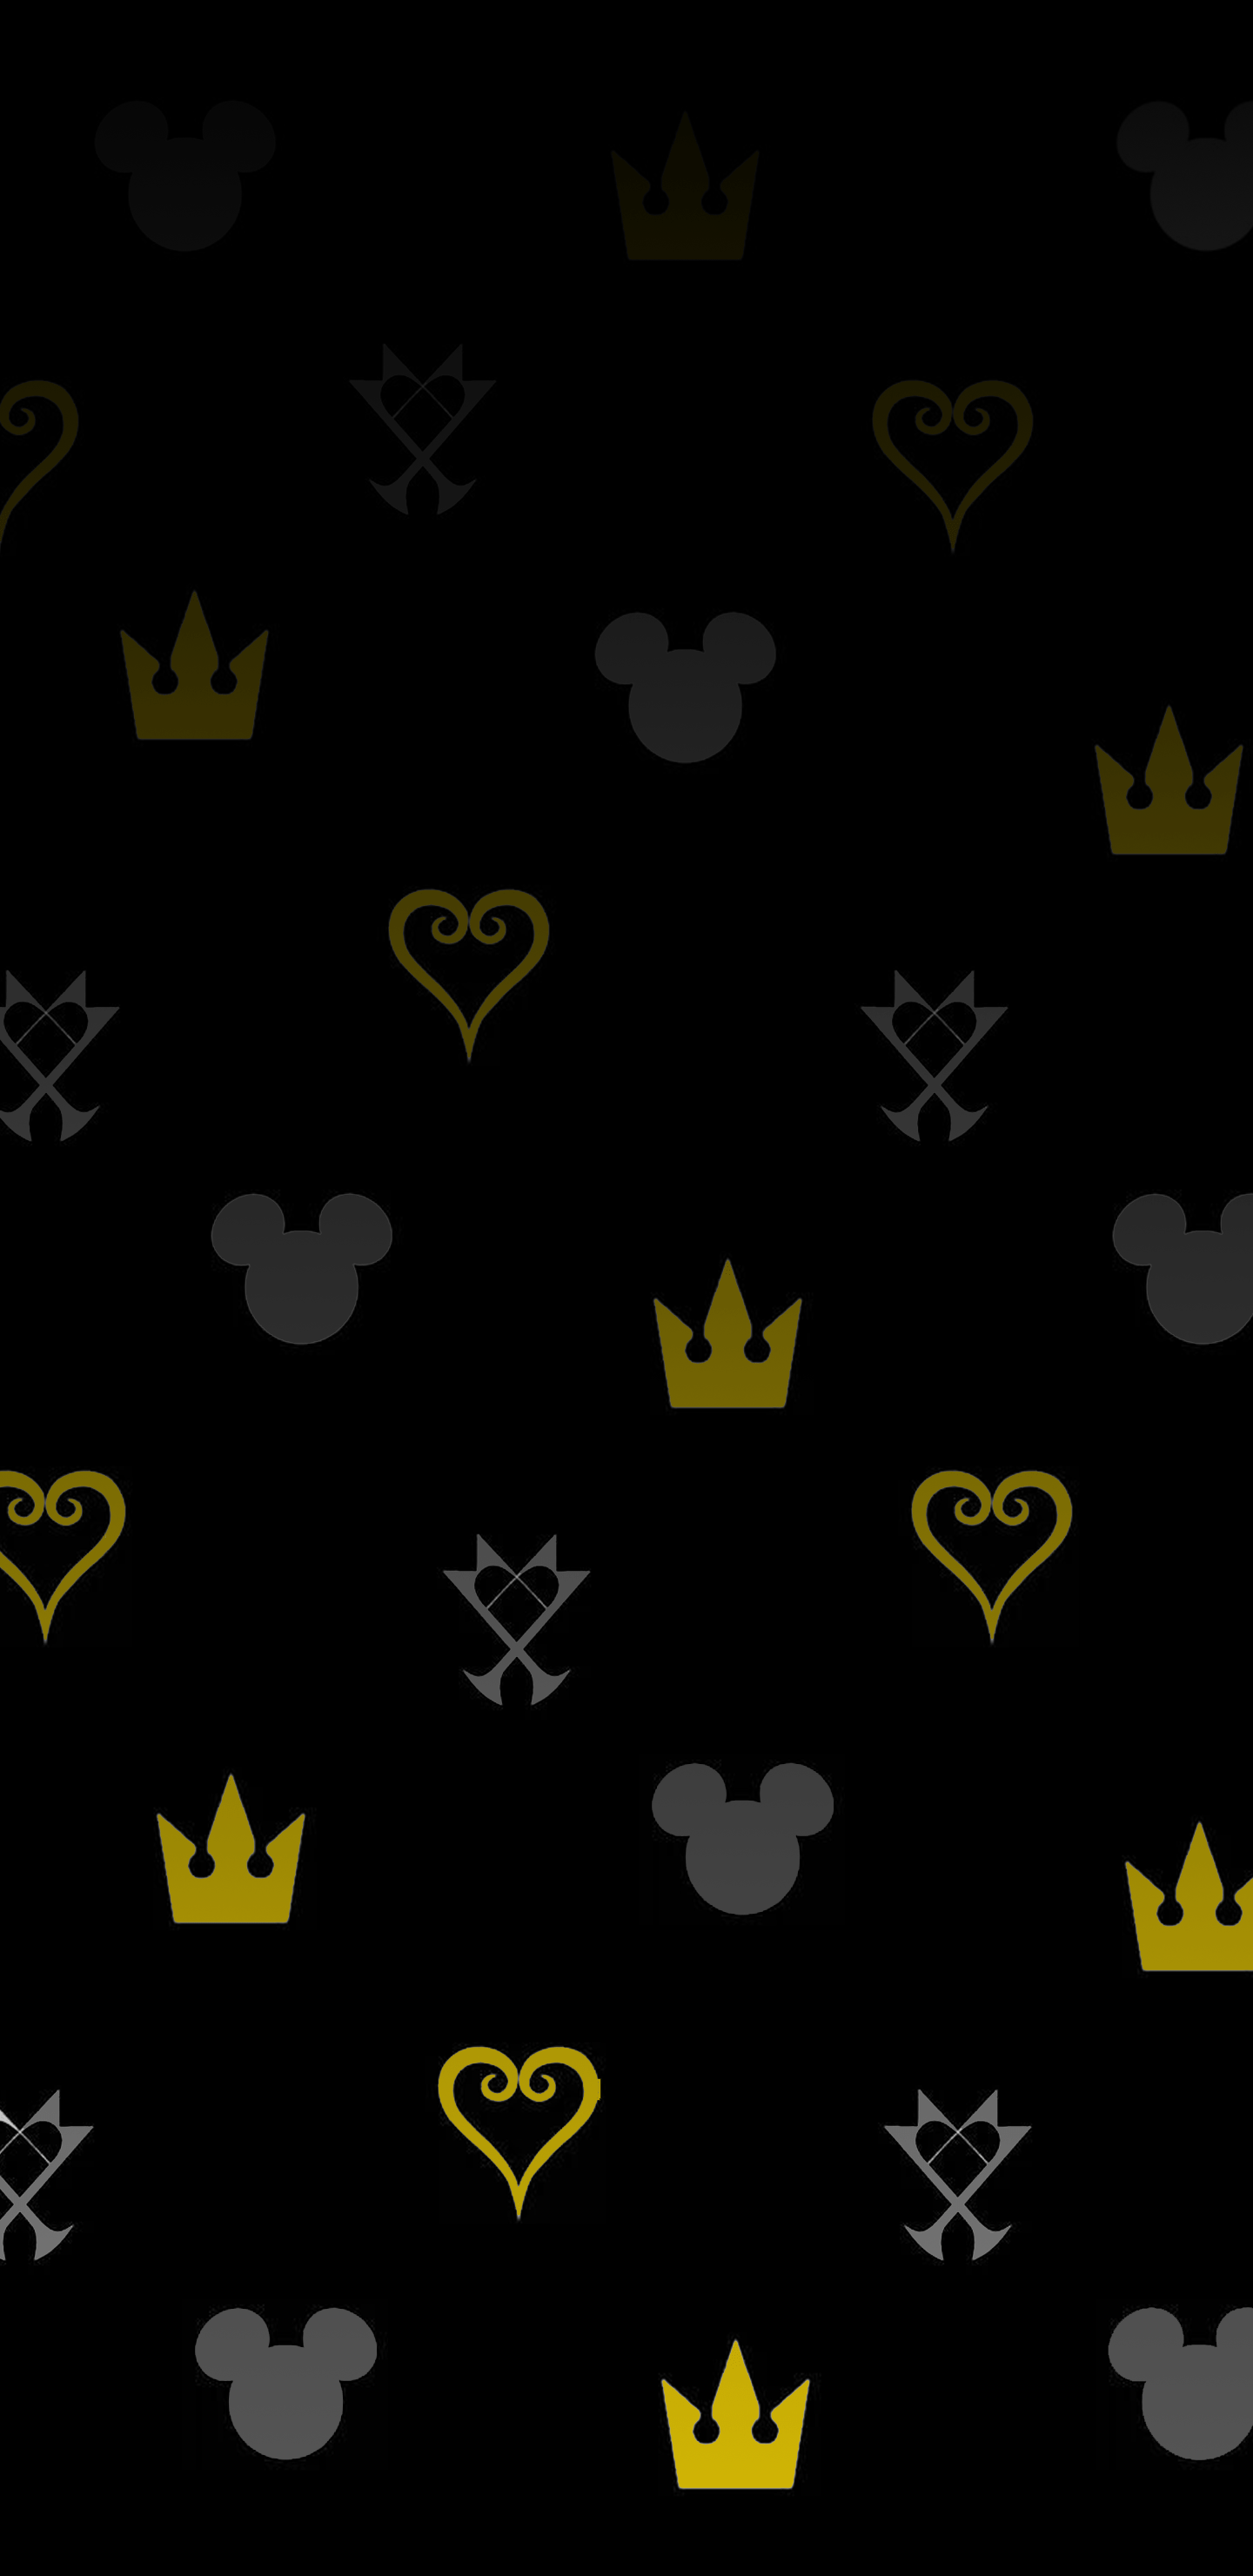 Kingdom Hearts Phone Wallpapers Top Free Kingdom Hearts Phone Backgrounds Wallpaperaccess